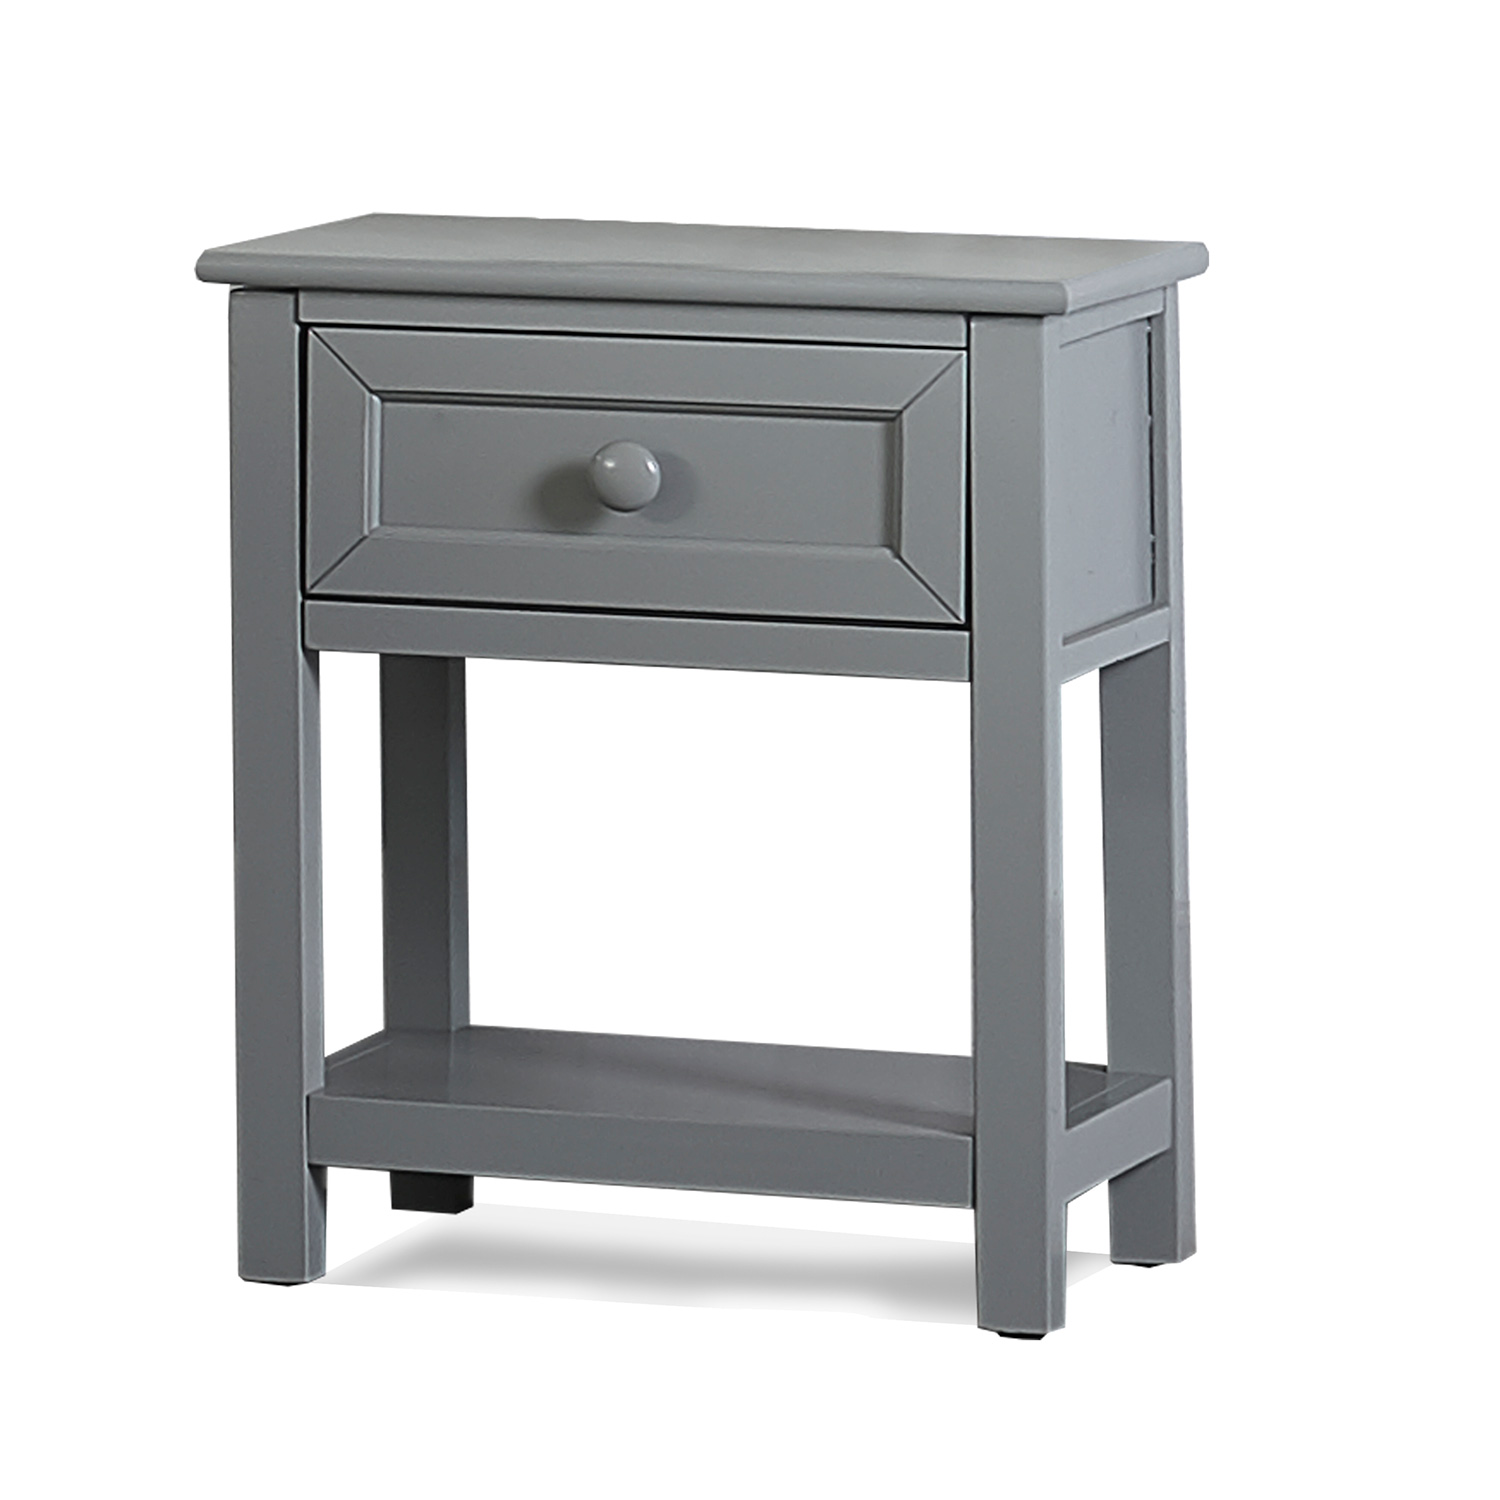 Hillsdale Caspian Twin Bookcase Bed with Nightstand - Gray